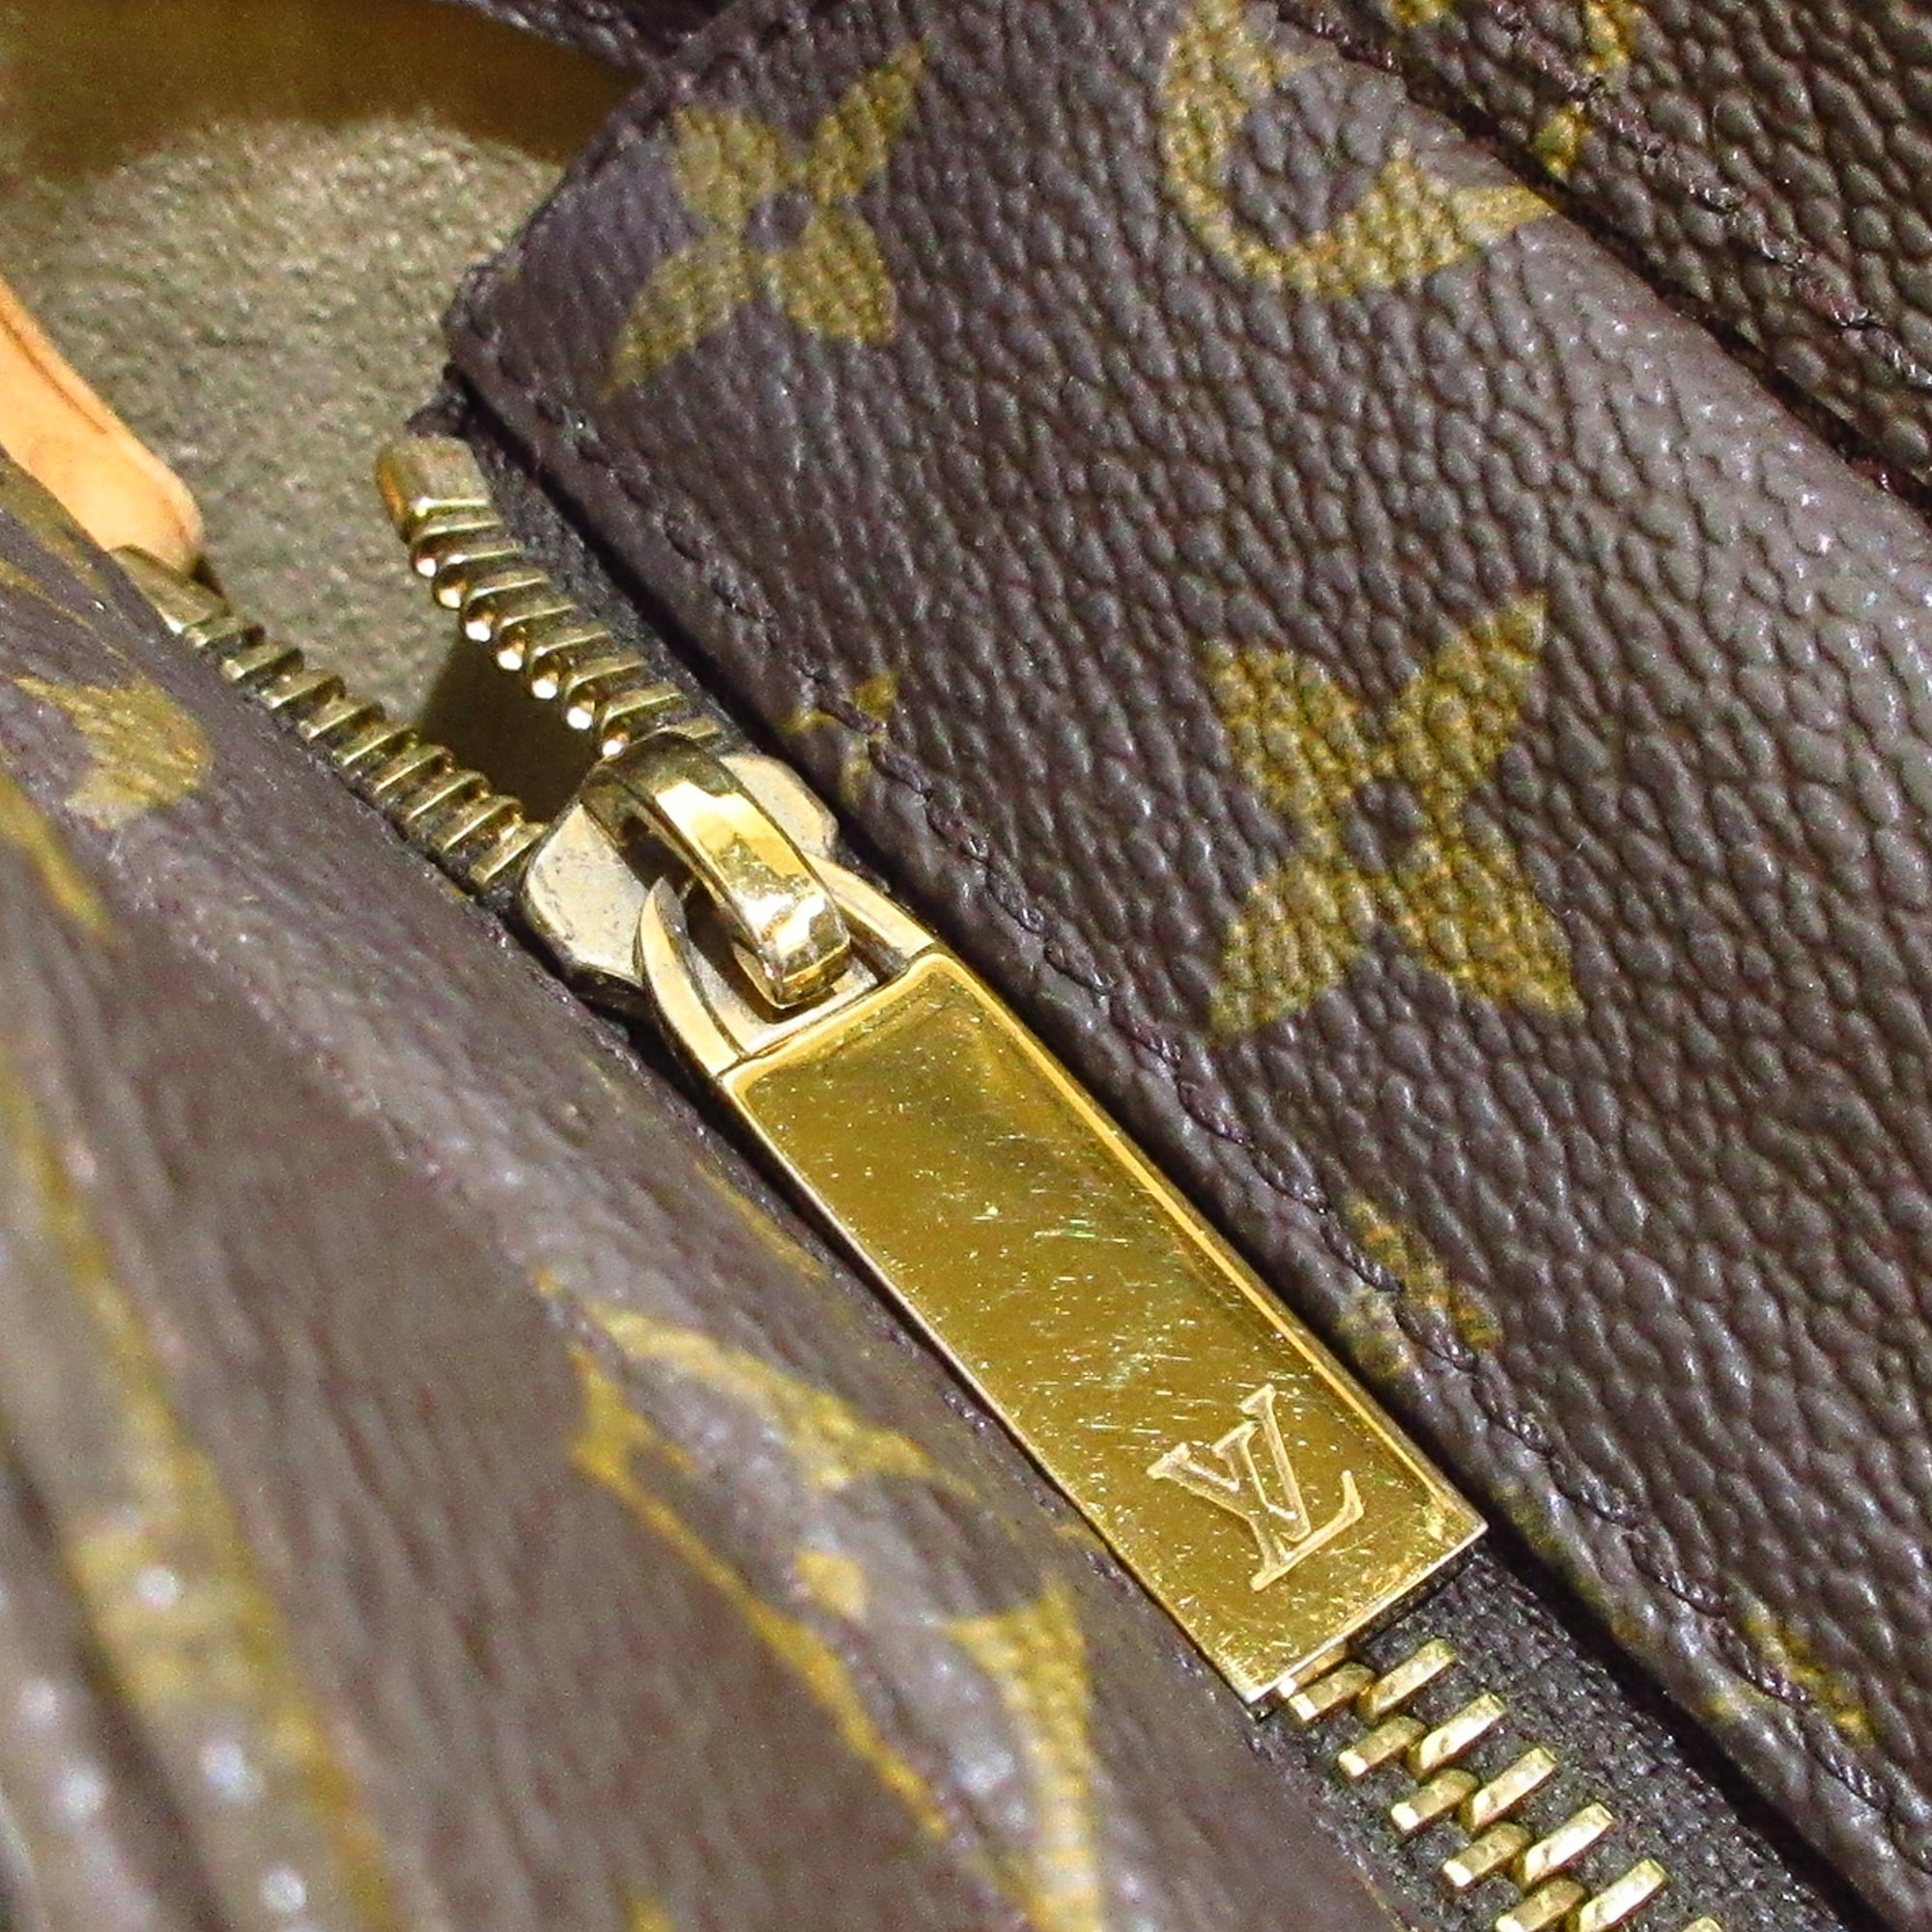 Louis Vuitton Luco Monogram Tote Bag - clothing & accessories - by